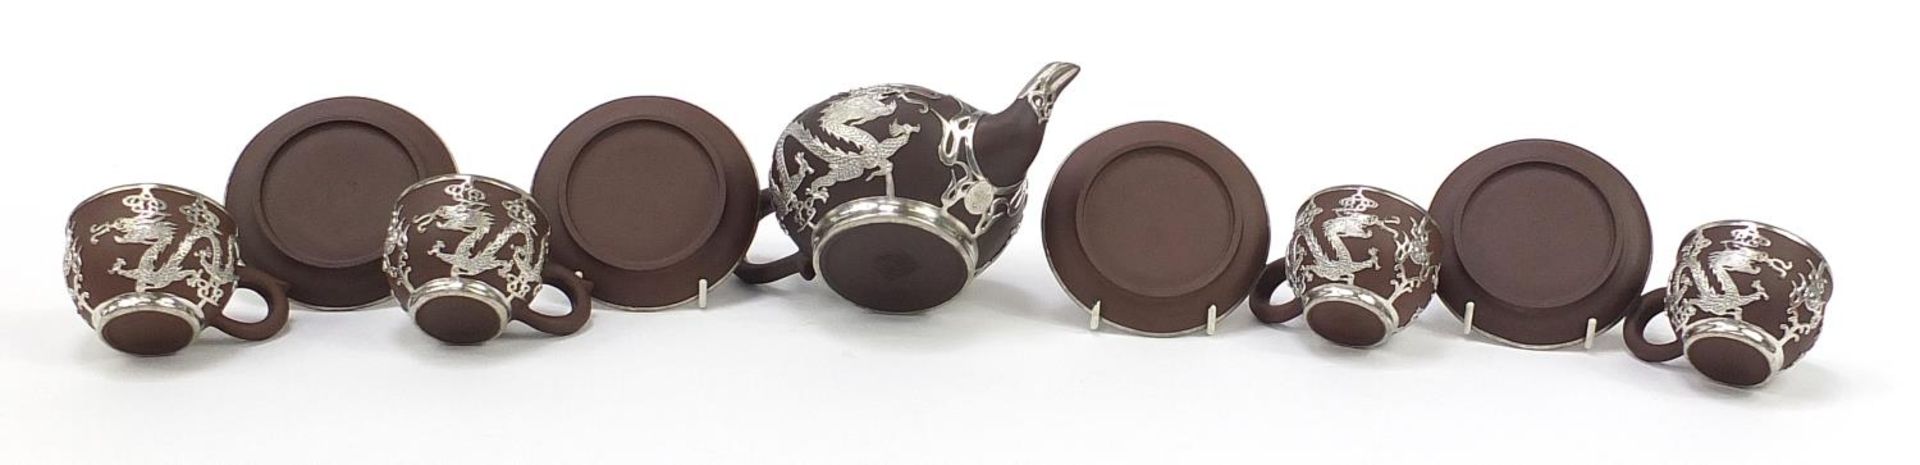 Chinese Yixing terracotta four place tea service with pewter dragon design overlay, various - Image 6 of 7